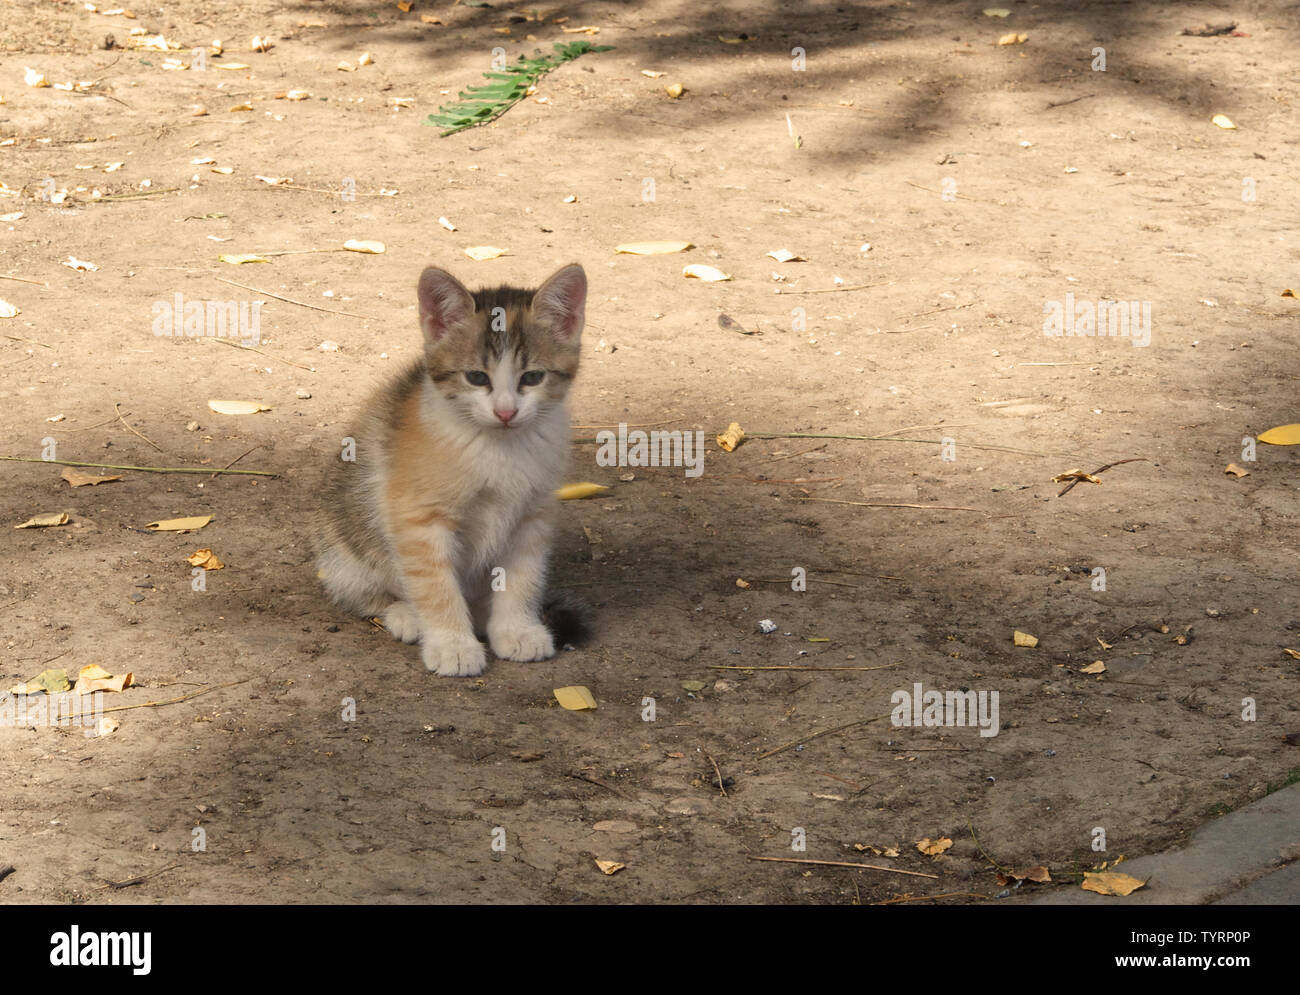 Little stray cat puppy in the sand of a park Stock Photo